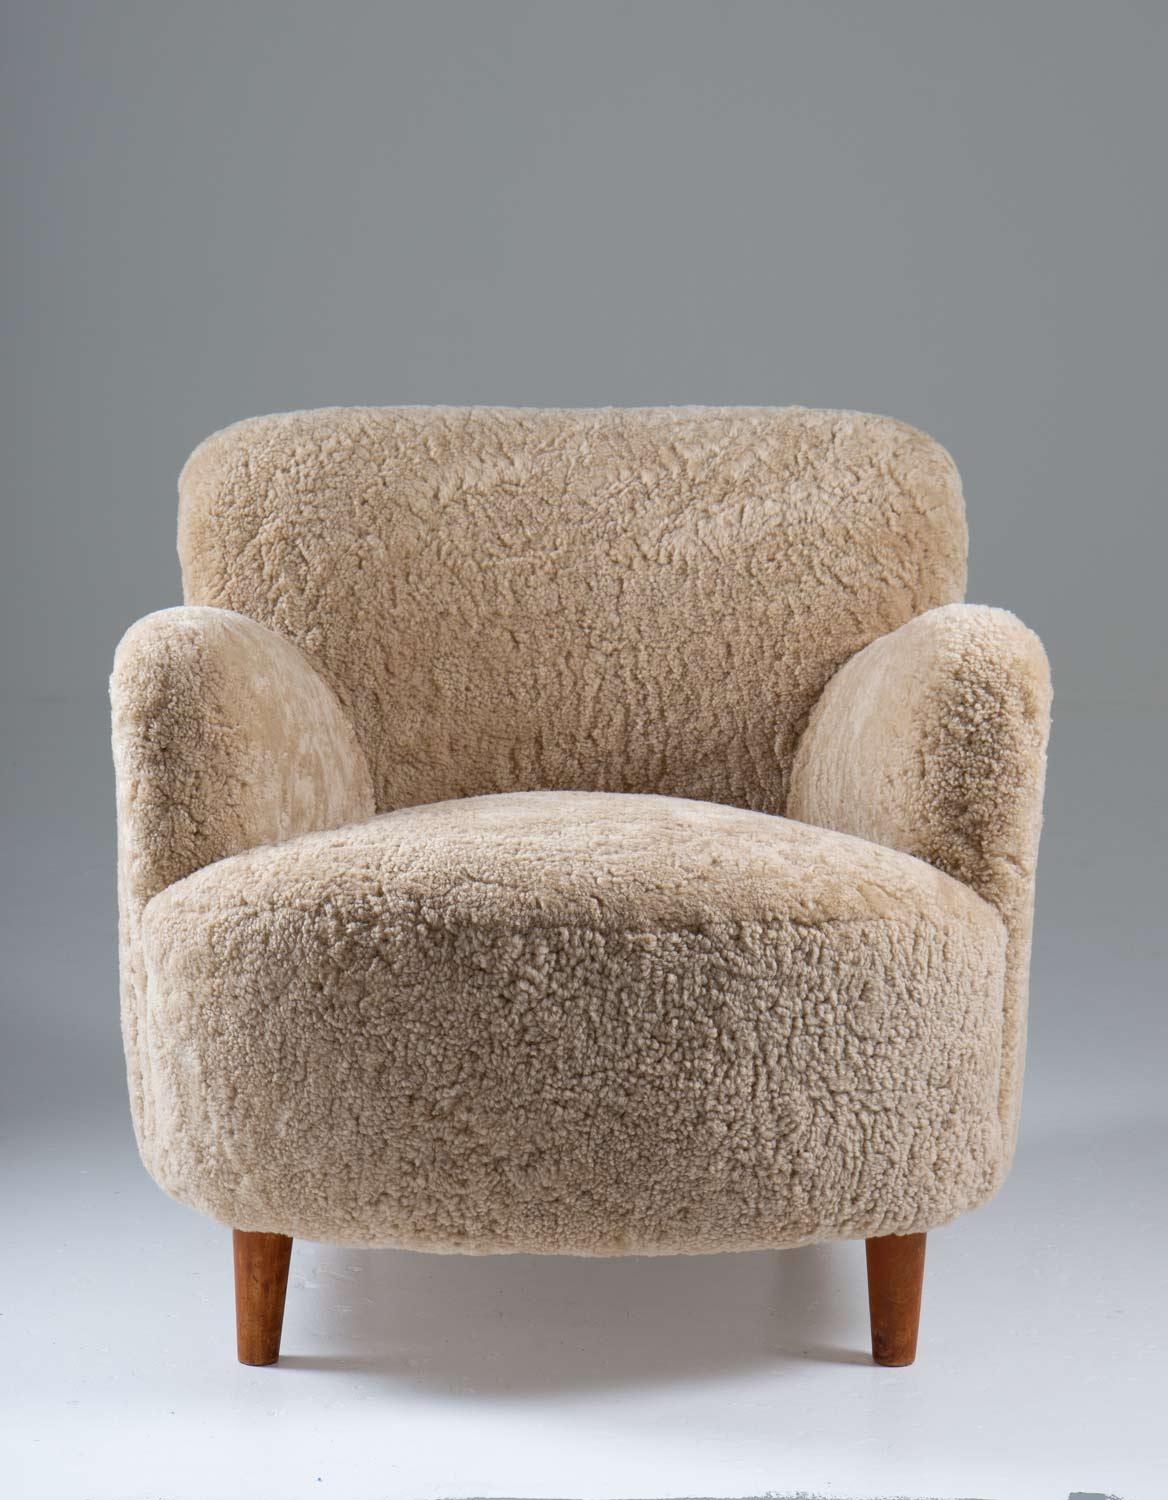 Low-back lounge chairs manufactured in Sweden ca 1940. 
Cozy lounge chairs with exceptional proportions and design. 
They have been reupholstered in ivory-colored sheepskin.

Condition: Excellent, fully restored and reupholstered, signs of age